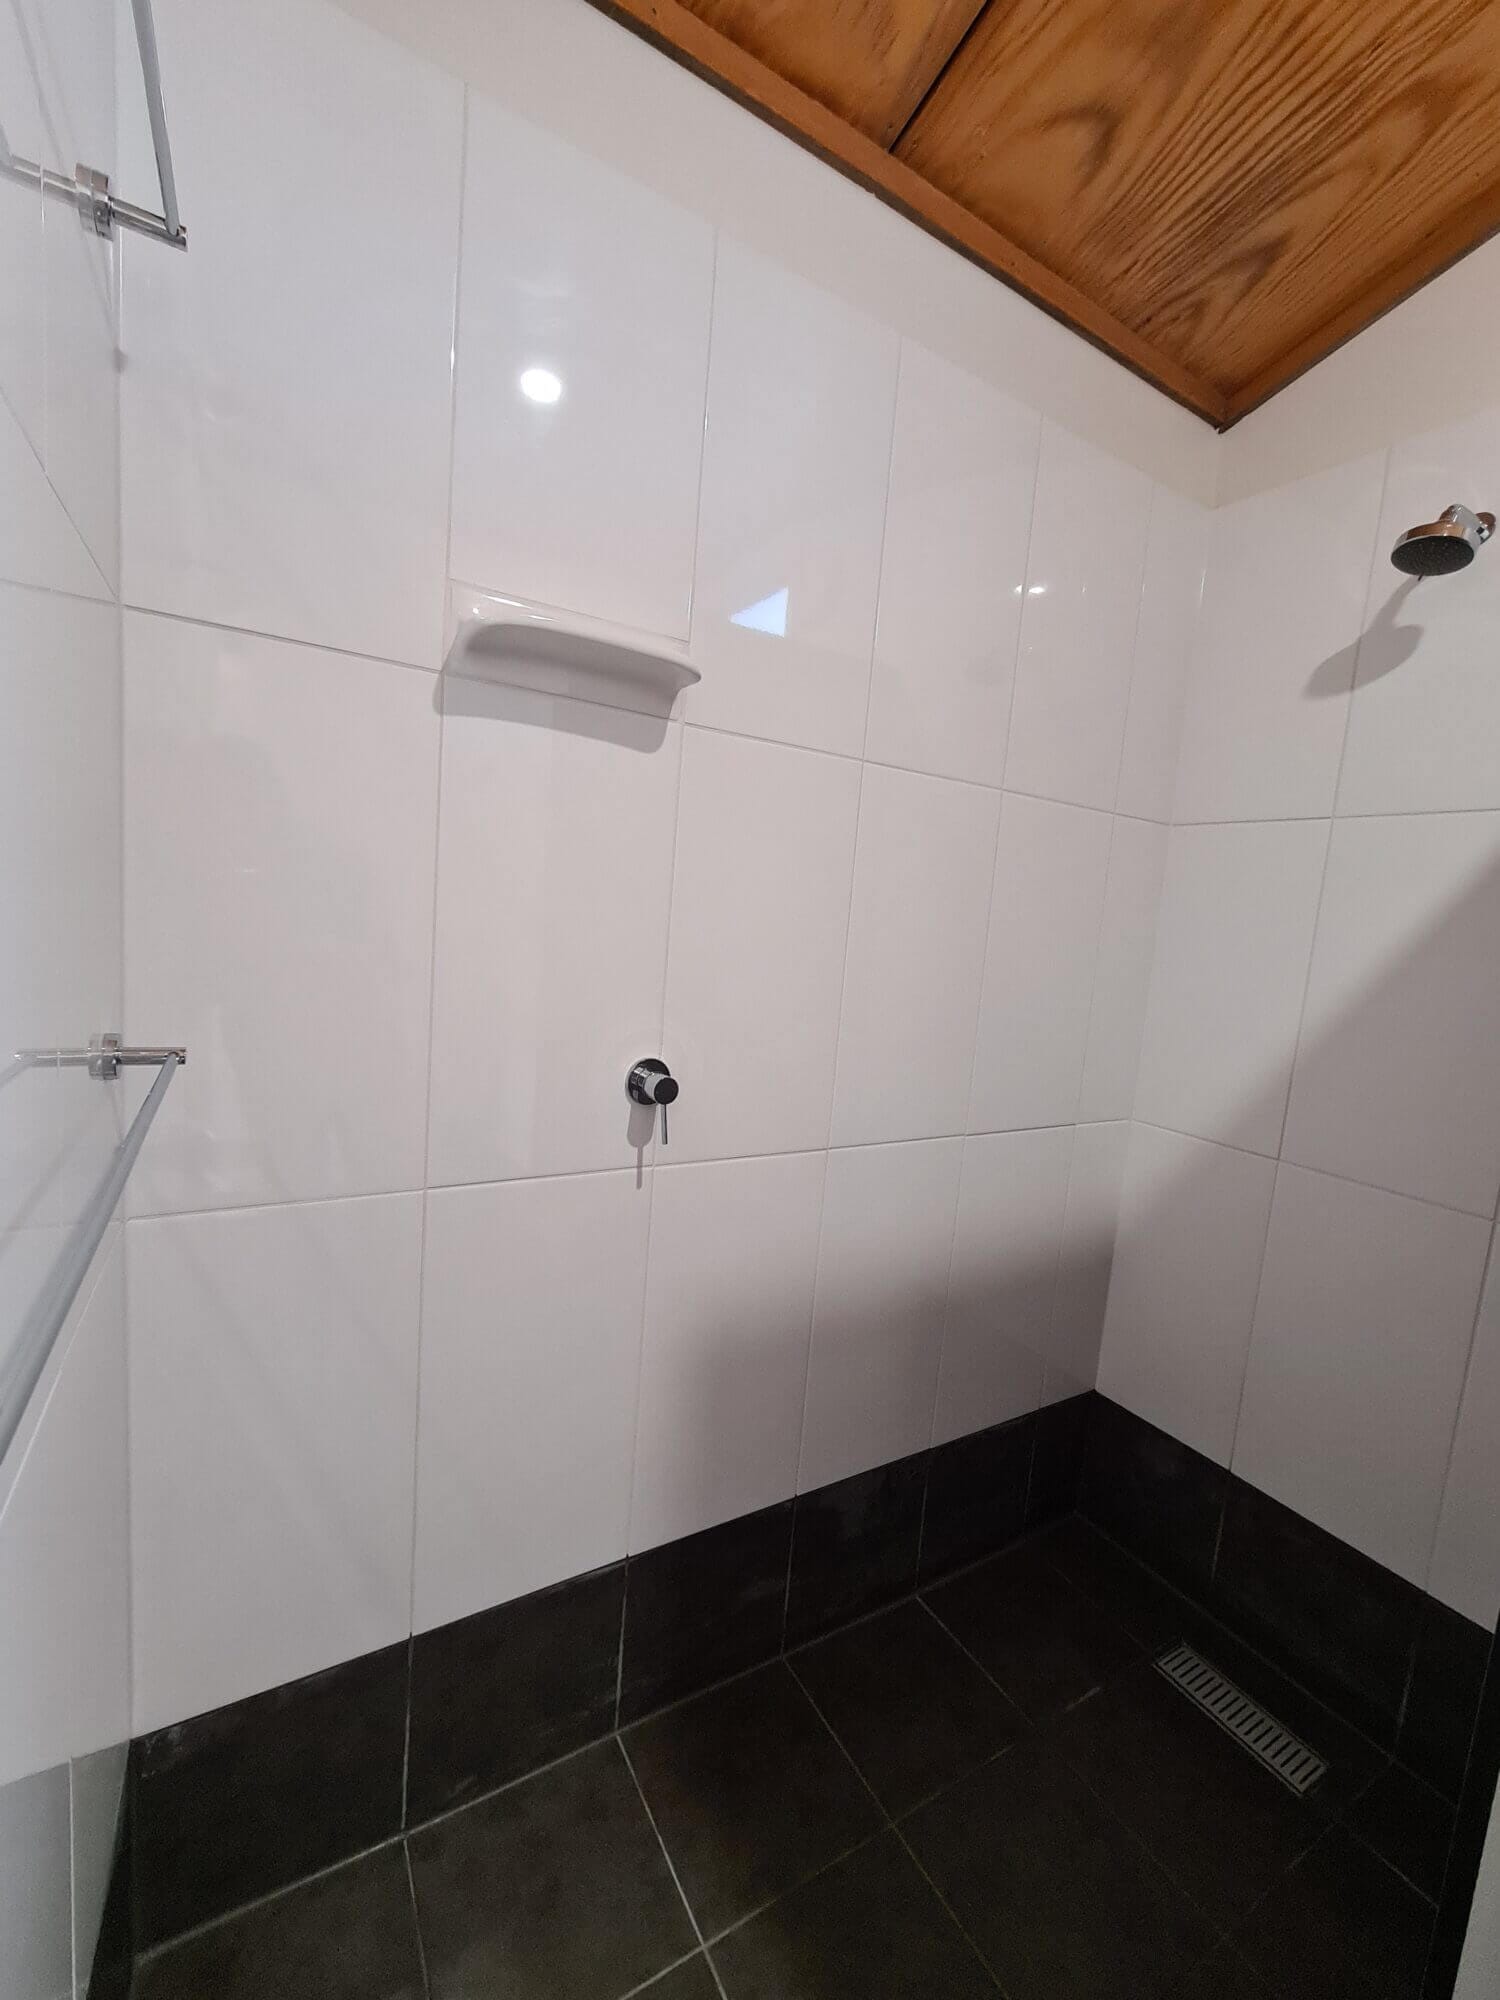 The Bay Cottage - Shower - Accommodation in Bremer Bay - 9 Roderick Street